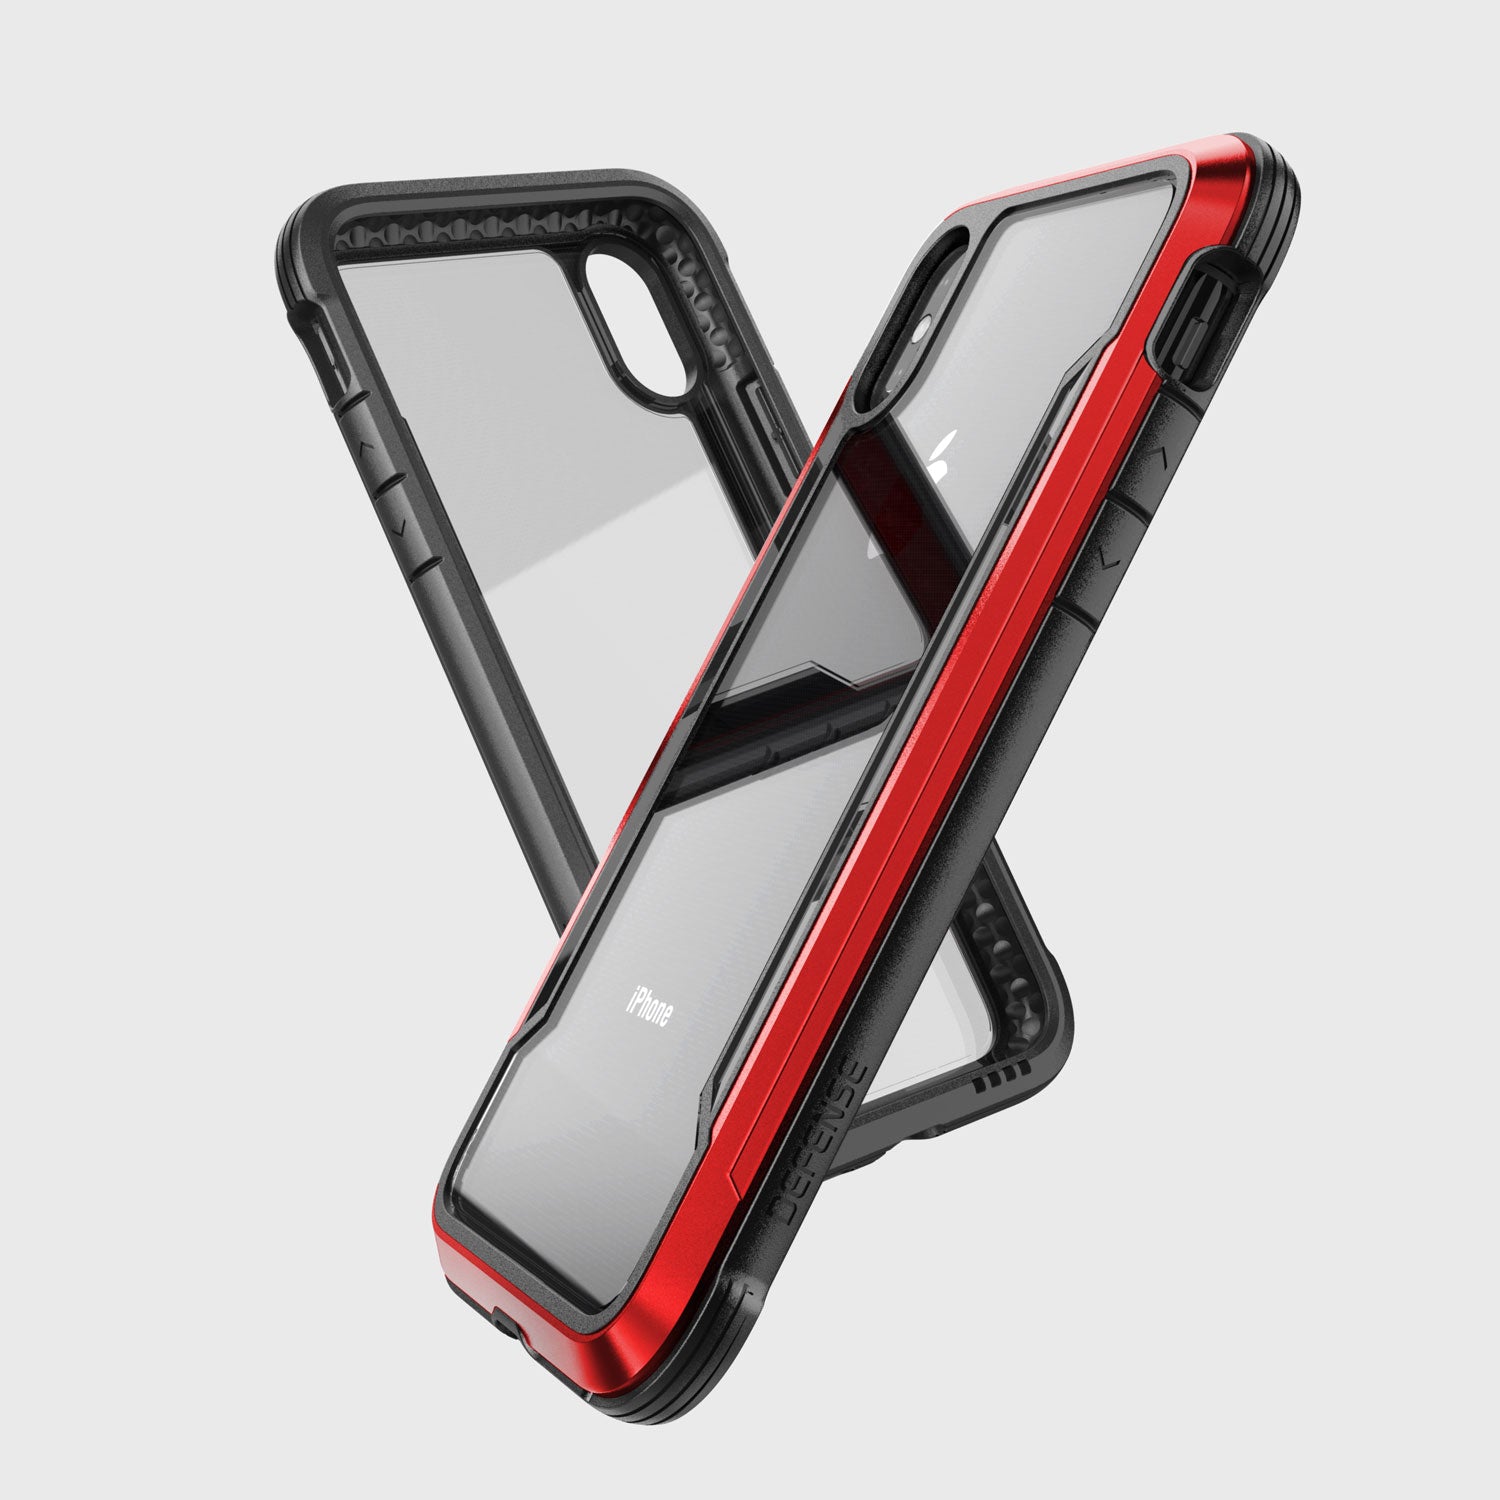 The Raptic SHIELD case offers drop protection for the iPhone XS Max in a stylish red and black color.